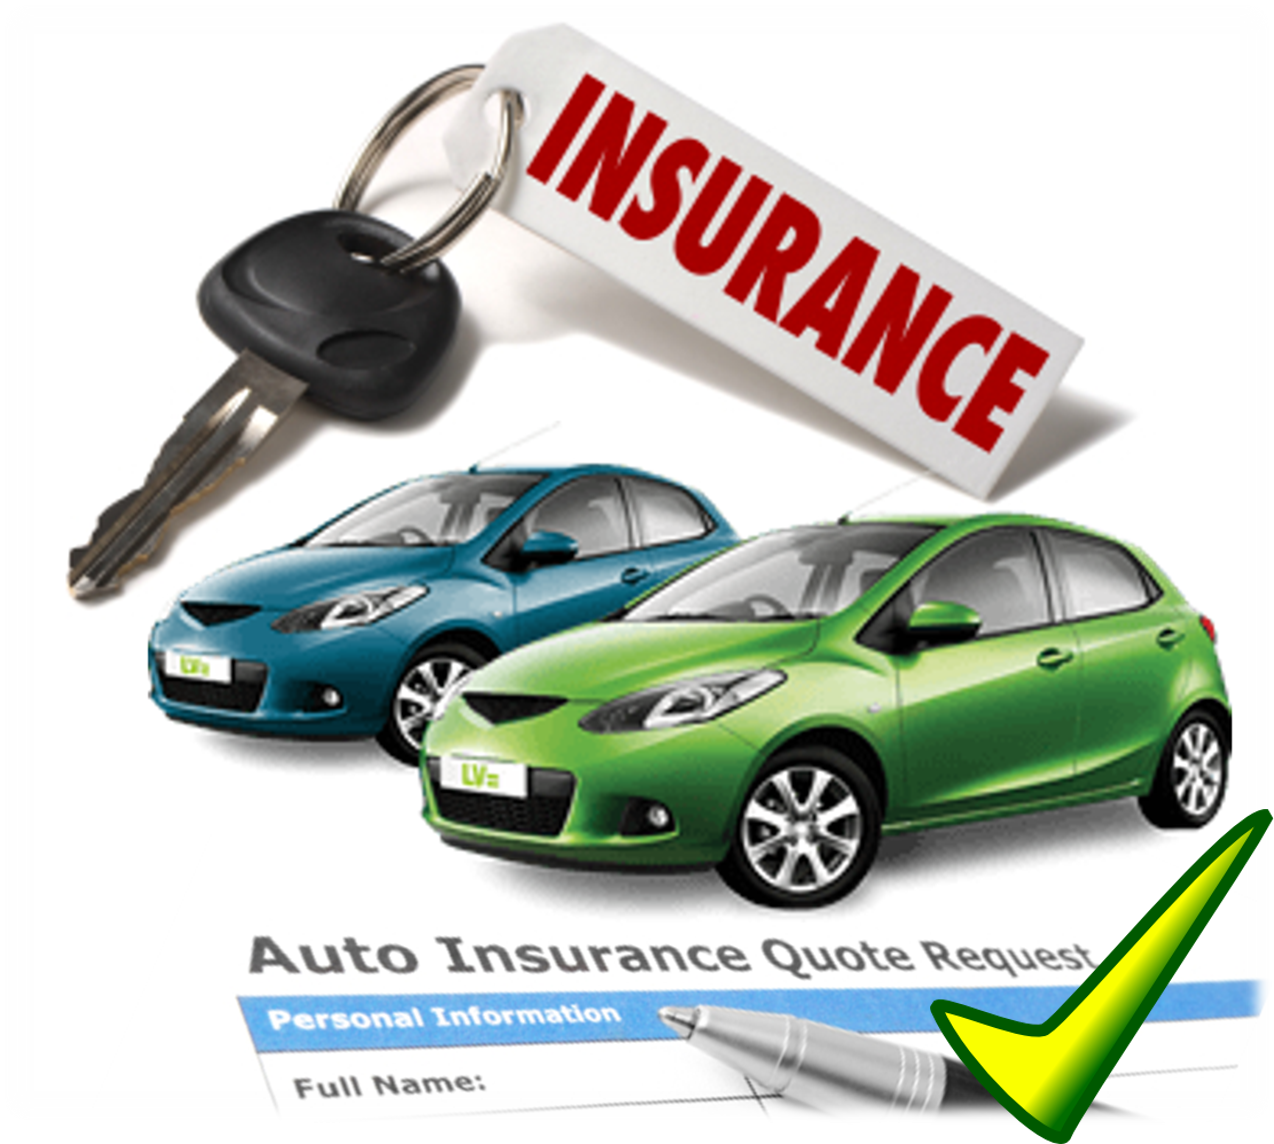 Georgia Car Insurance Quote - What is a Good Deal